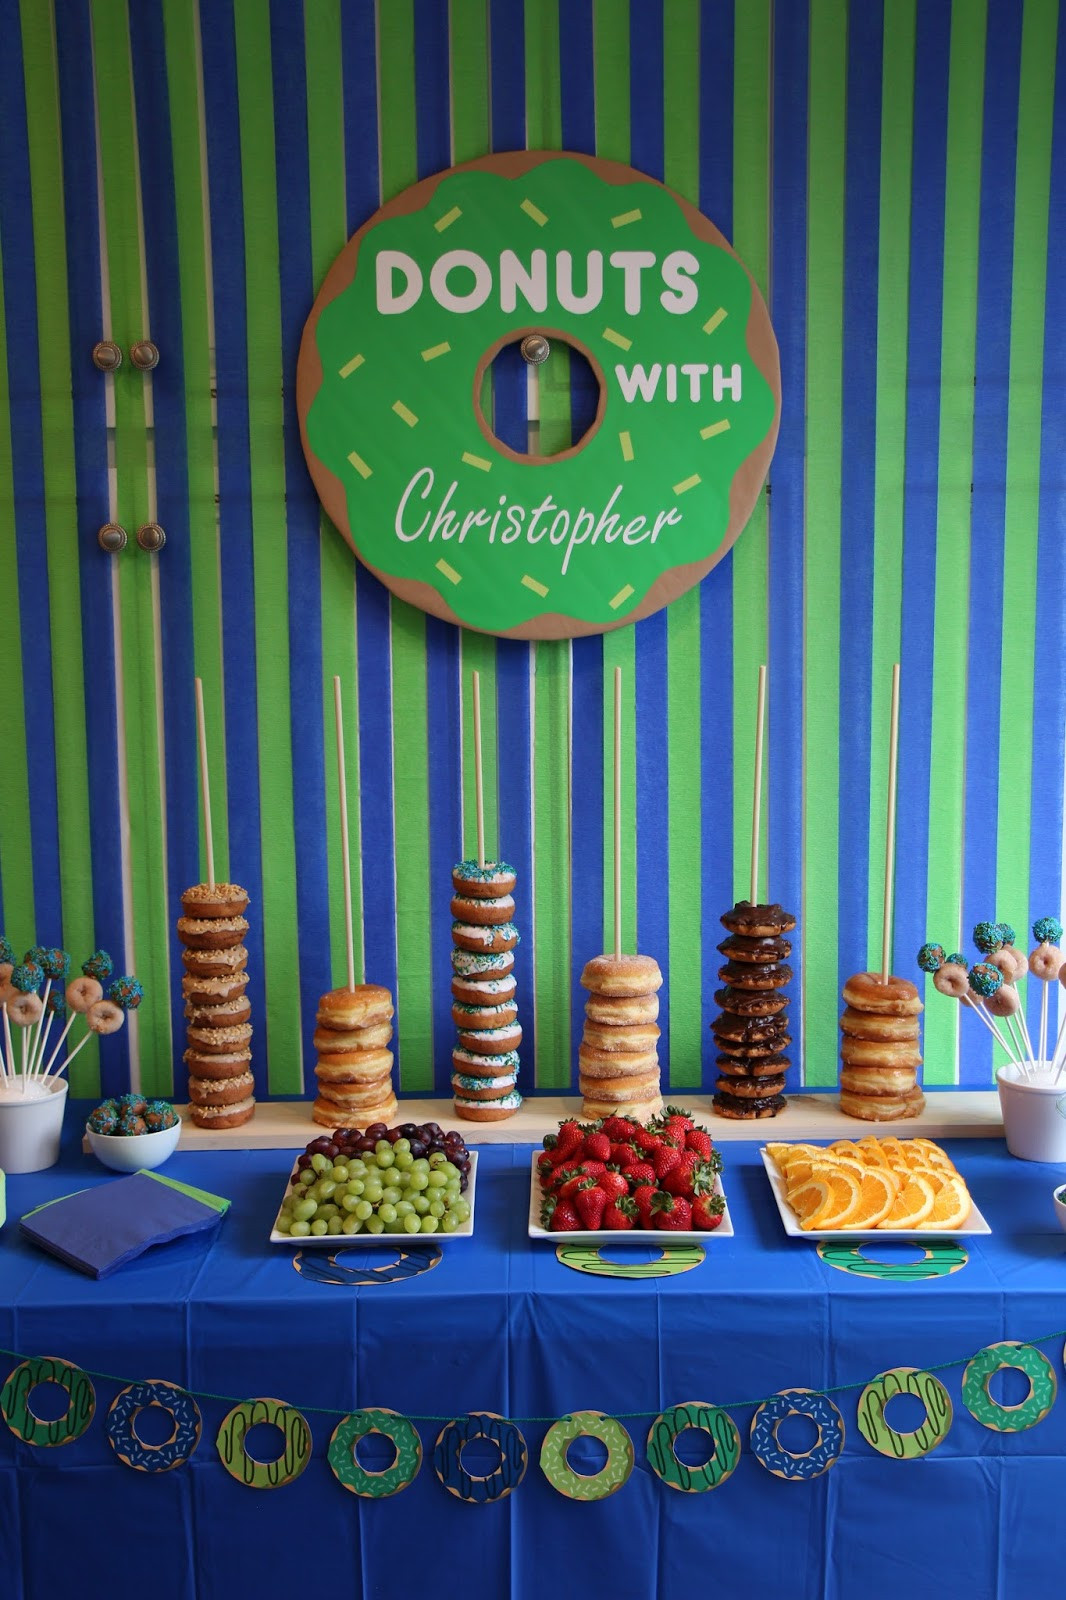 Donut Birthday Party
 SNL Parties Donuts with Christopher for his 4th Birthday